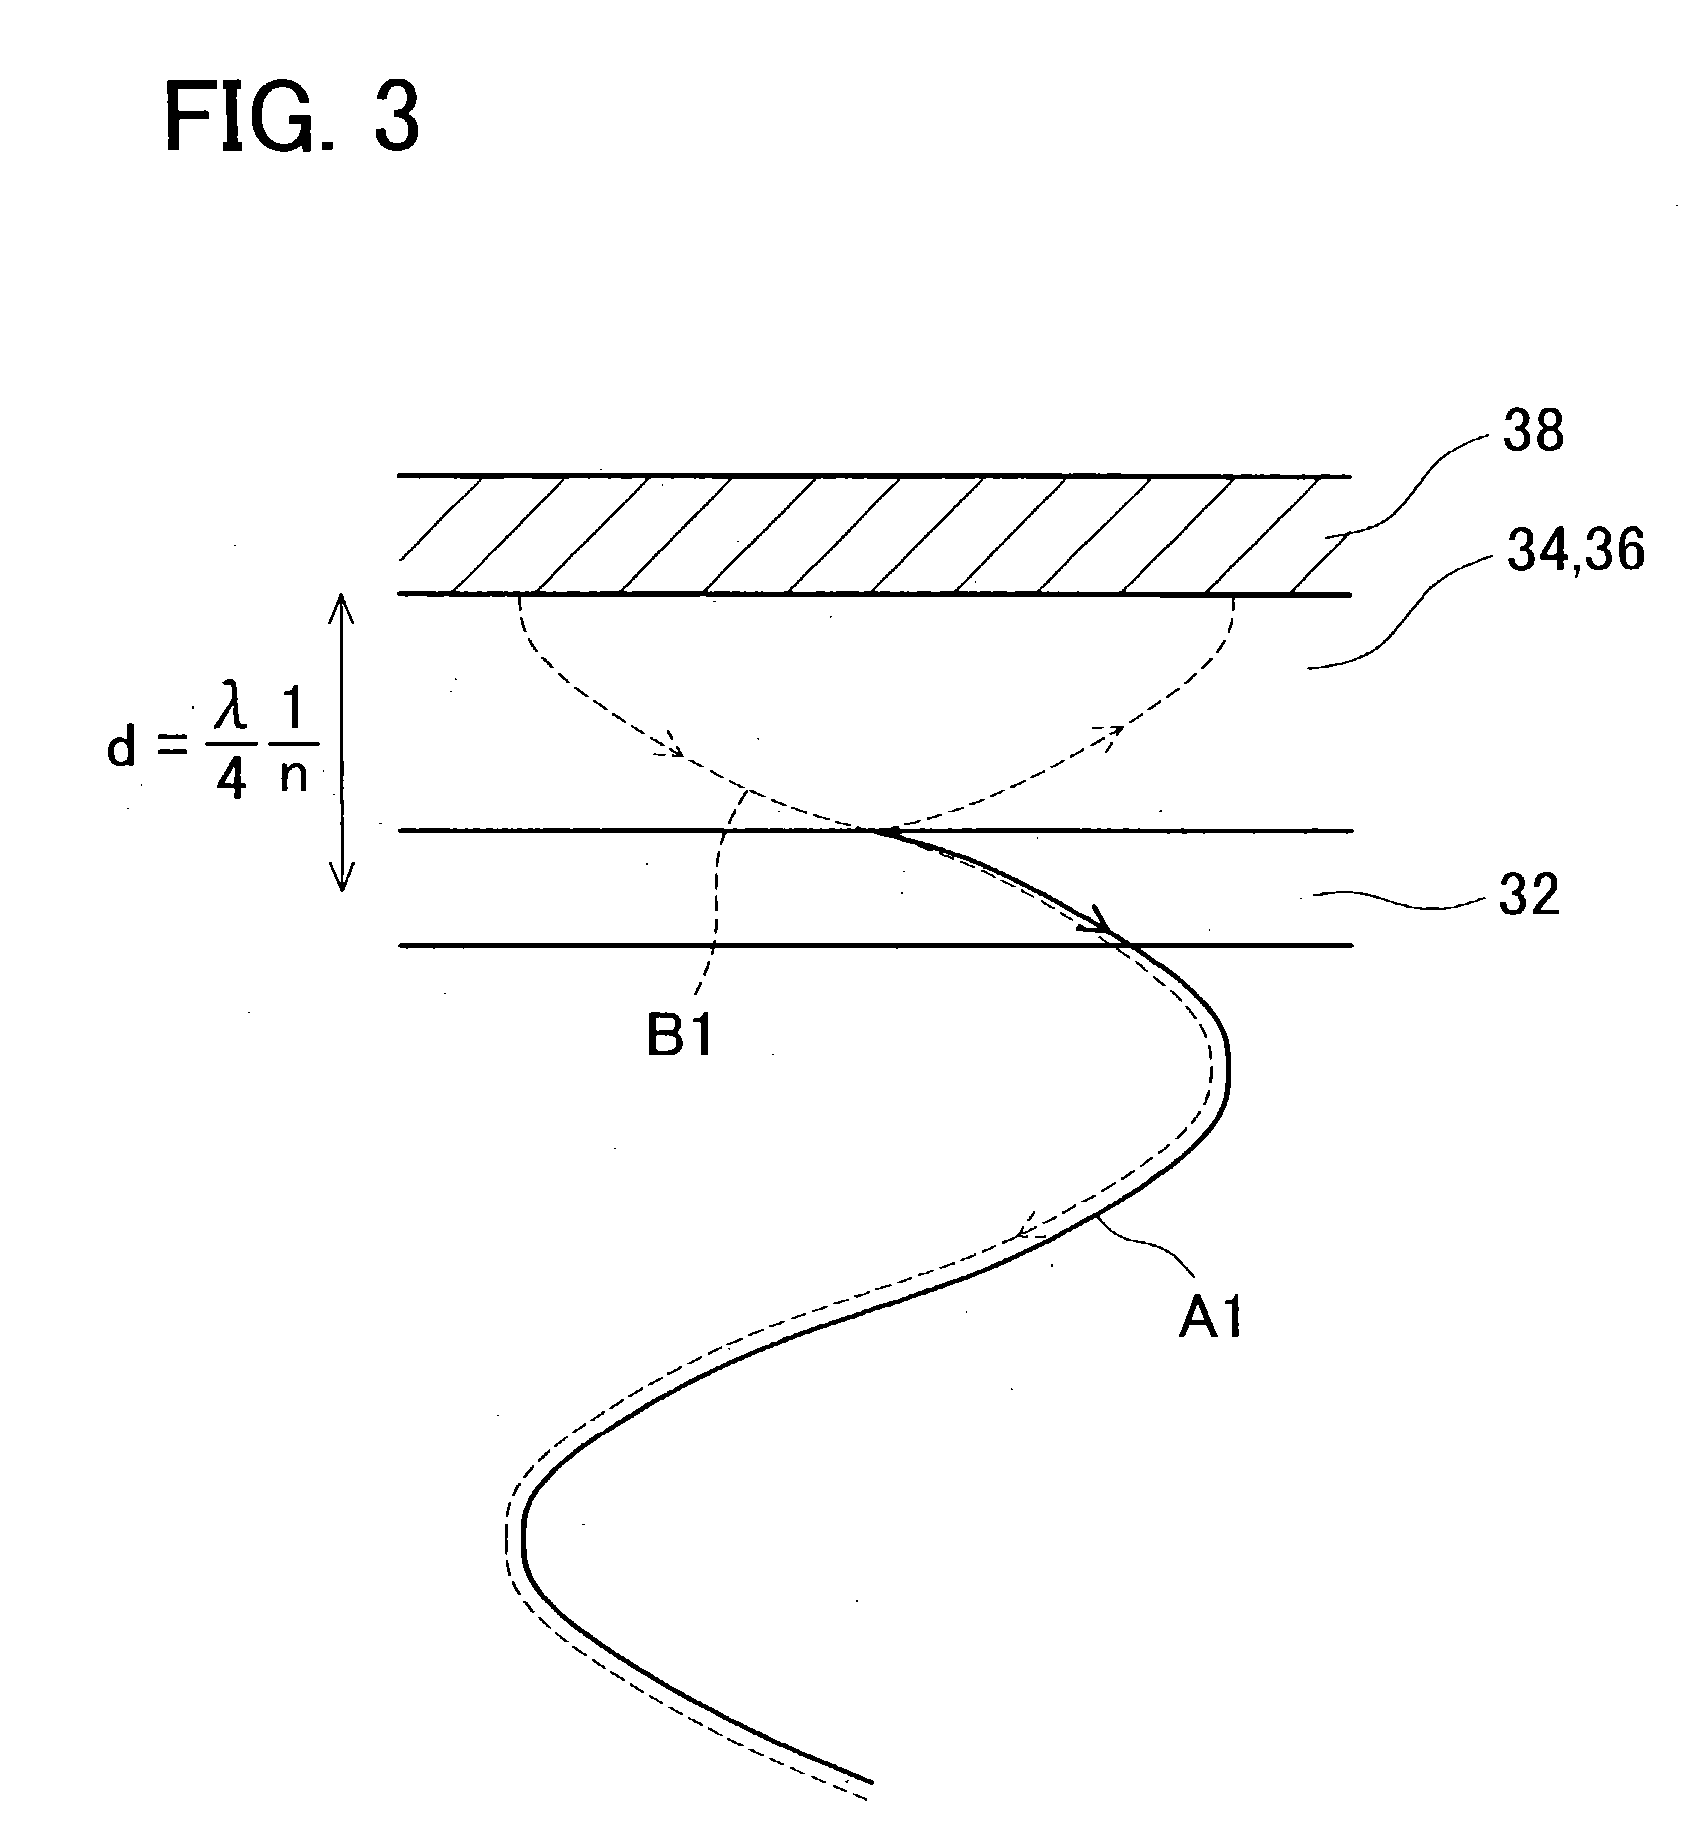 Nitride semiconductor light emitting diode